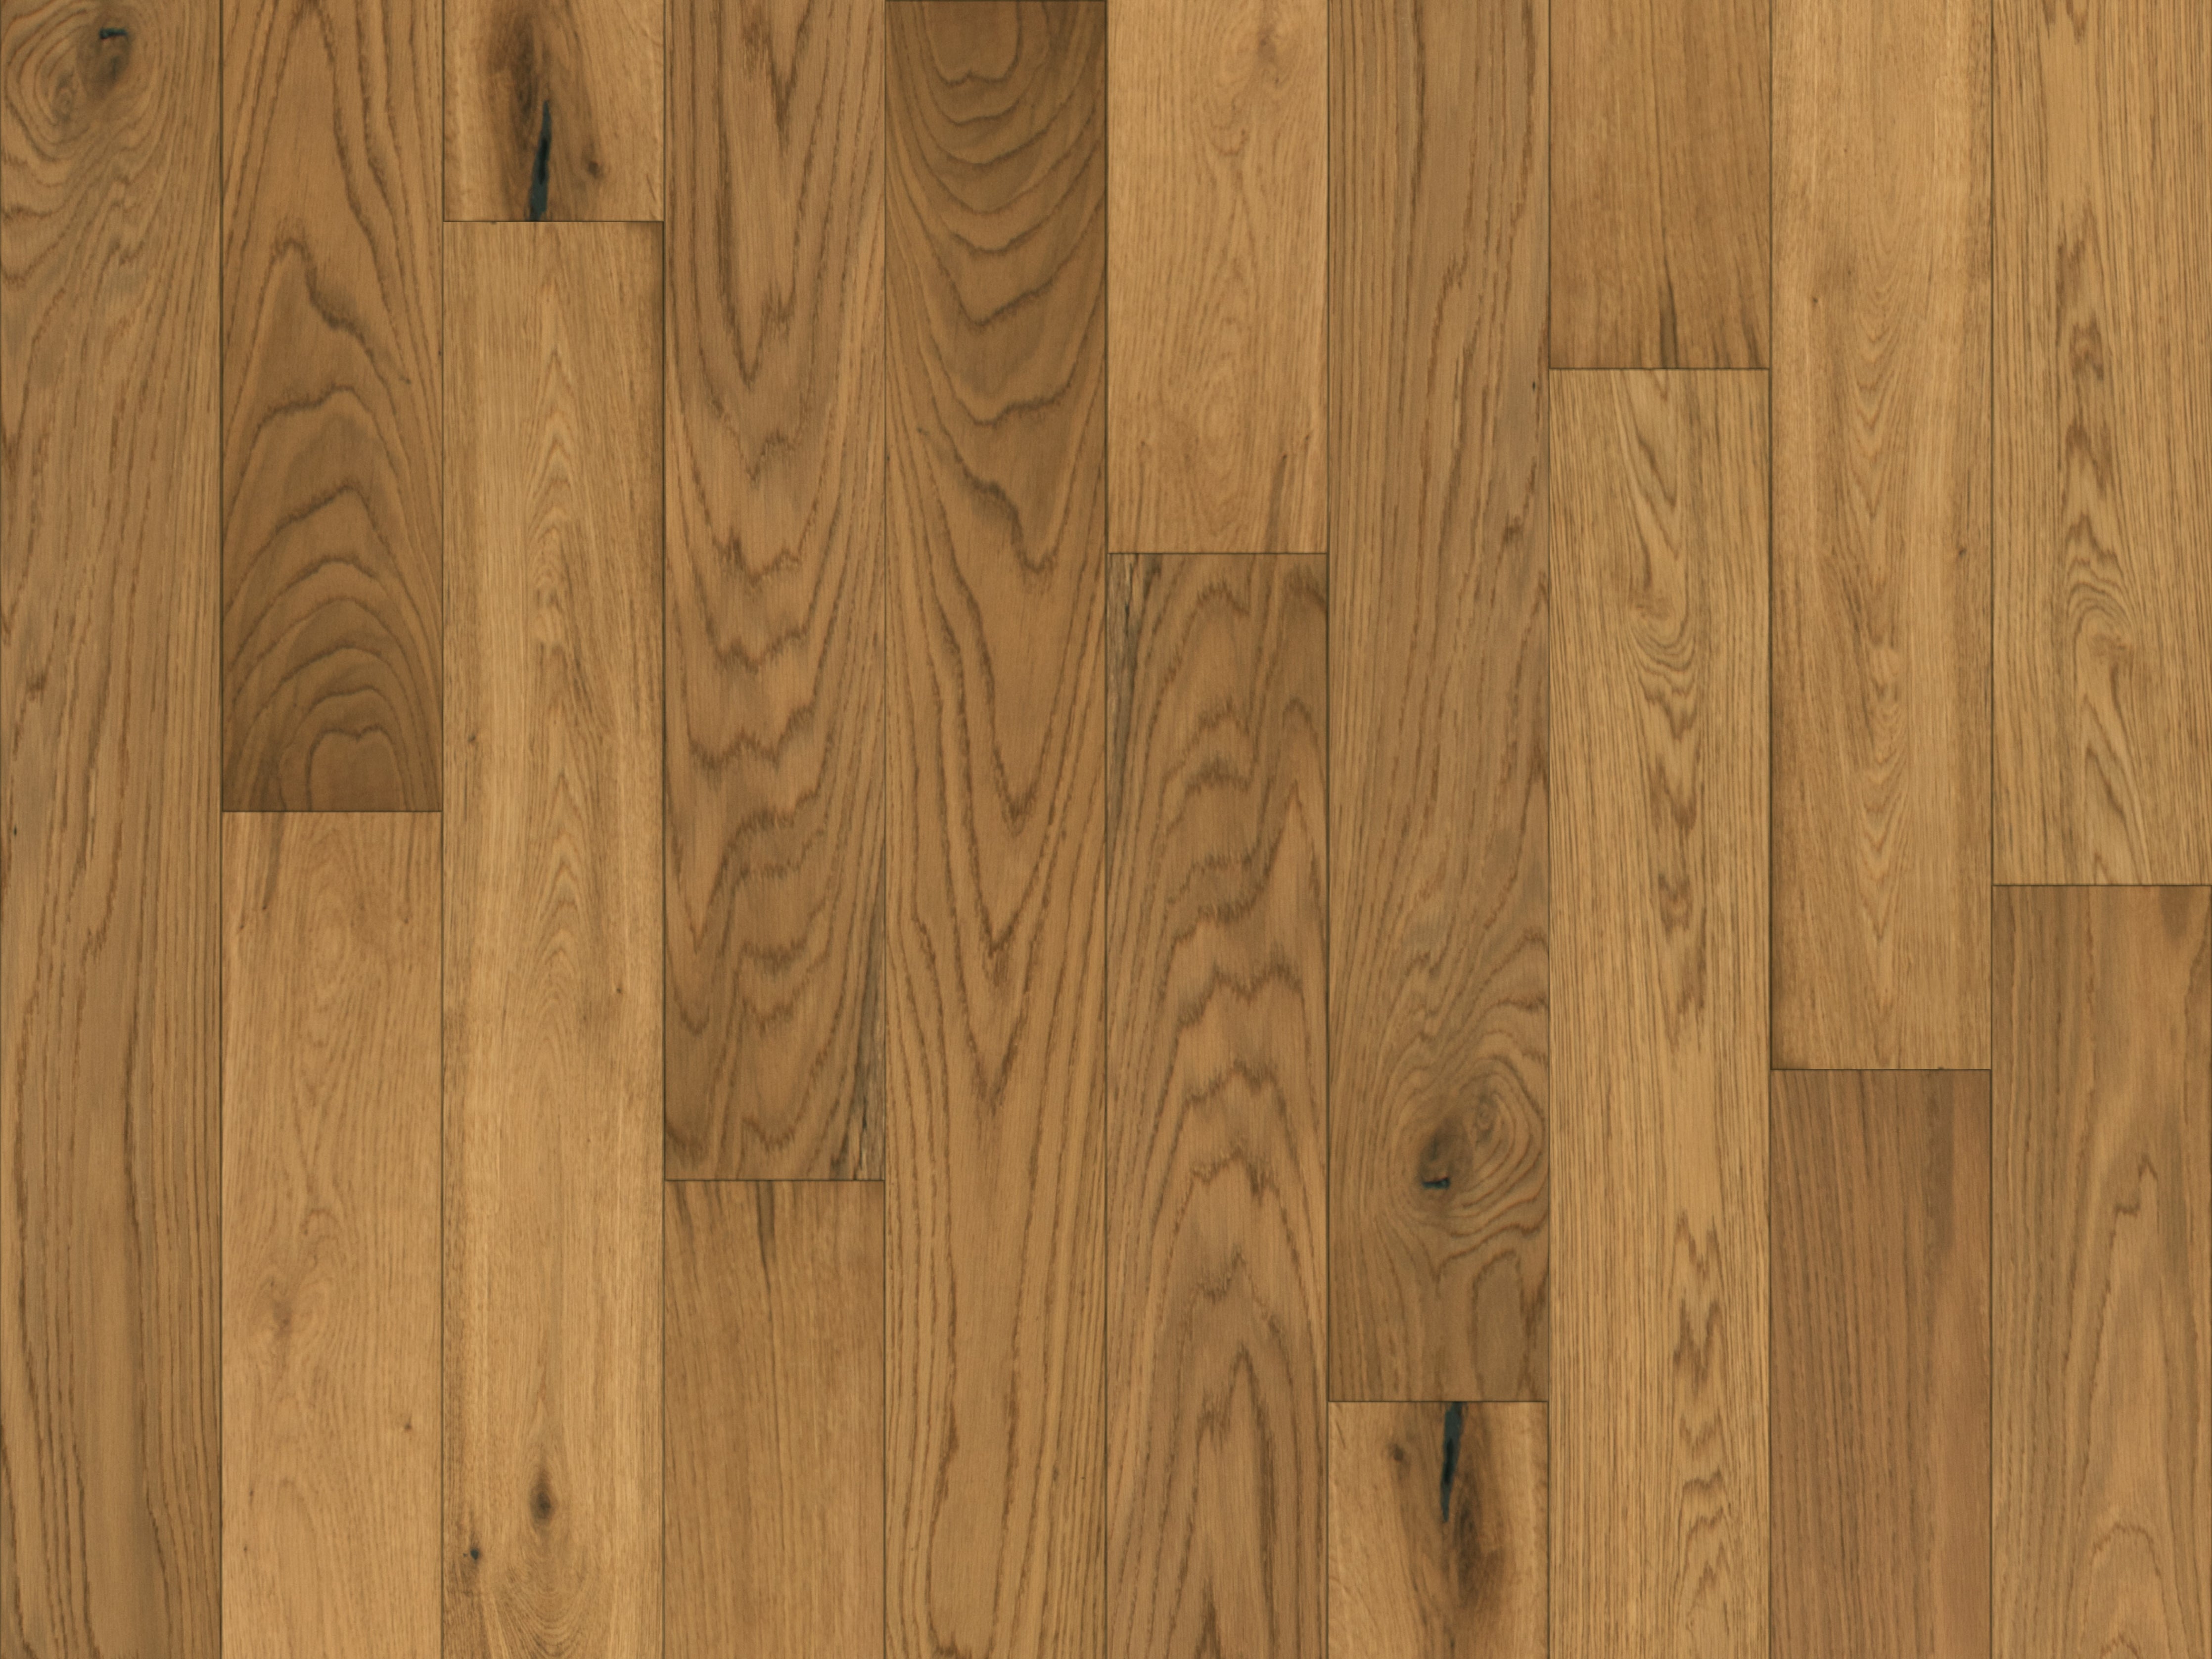 duchateau the guild lineage riley european oak engineered hardnatural wood floor uv lacquer finish for interior use distributed by surface group international